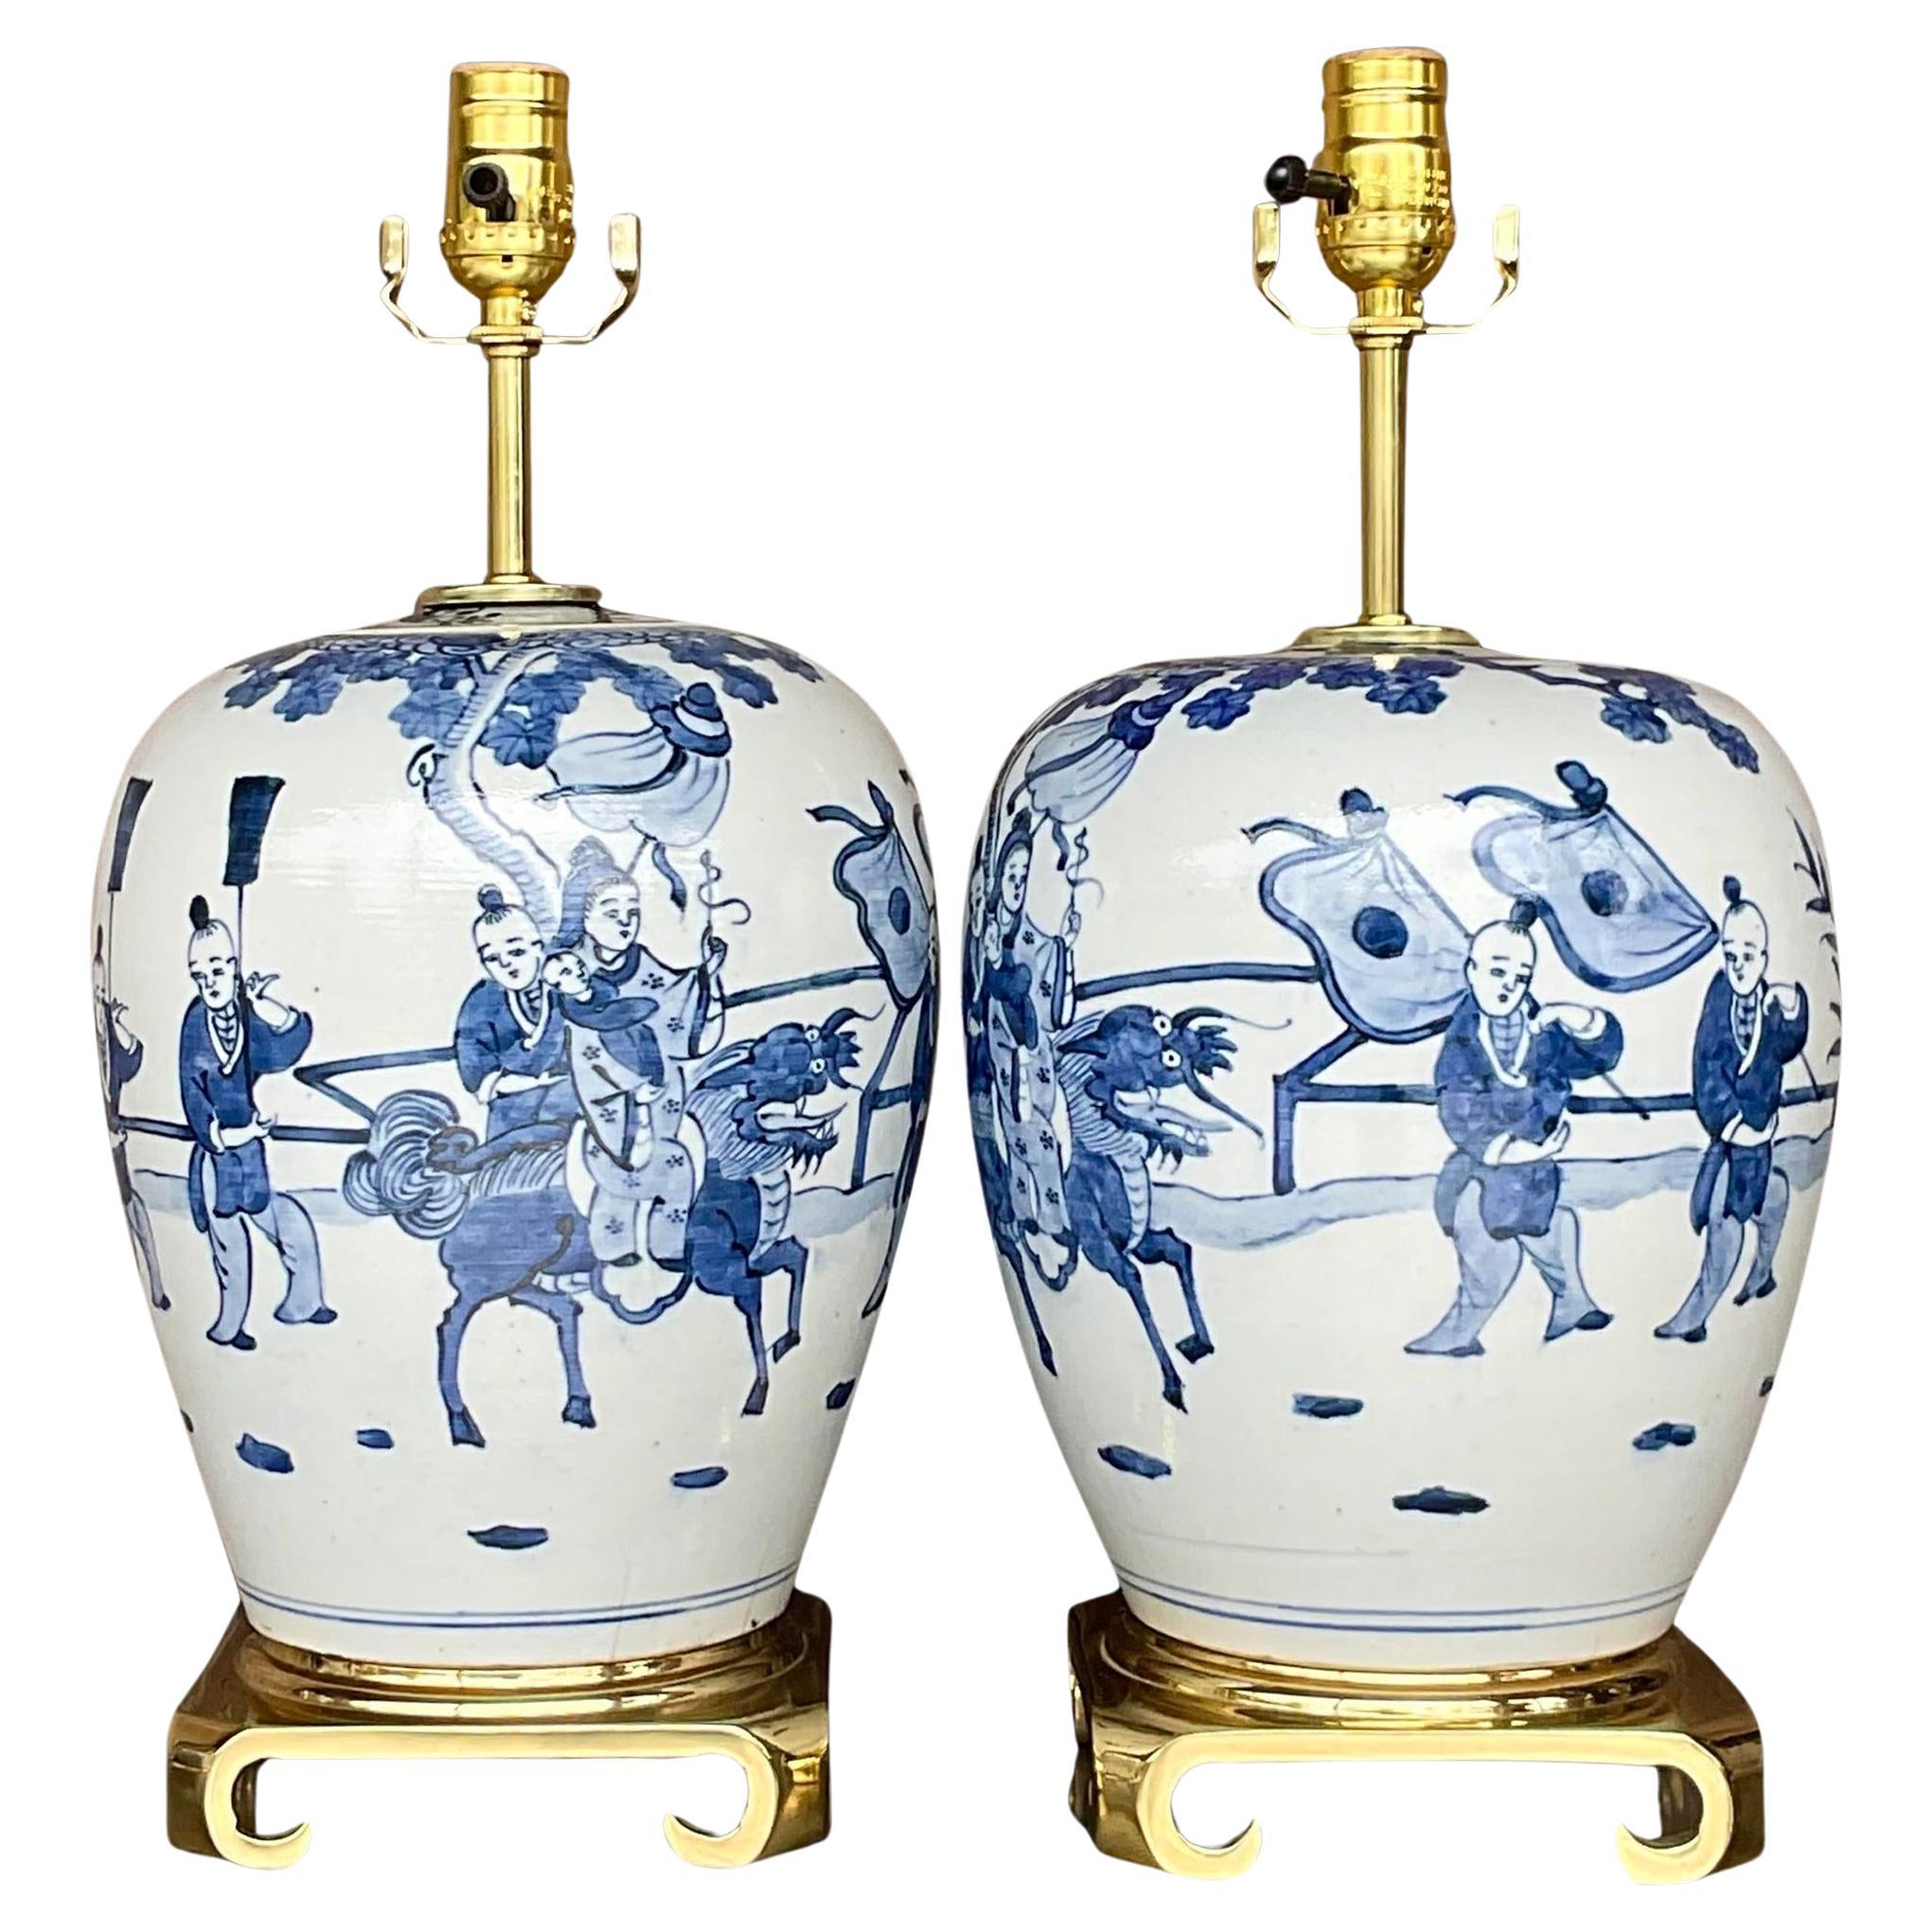 Vintage Asian Blue and White Pastoral Glazed Ceramic Lamps - a Pair